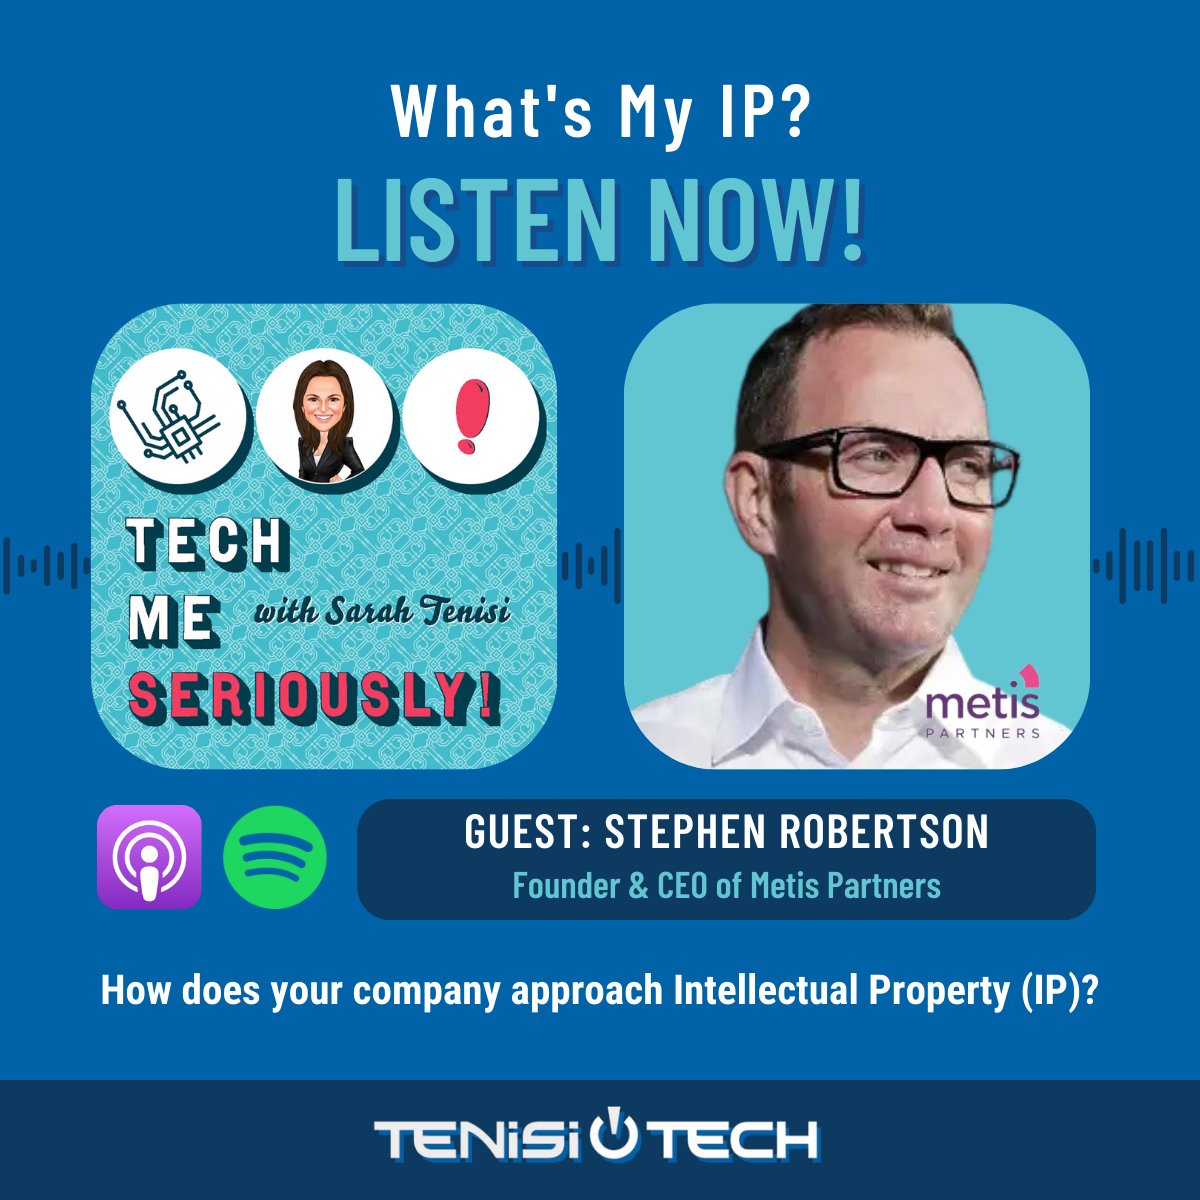 🚀 #TechMeSeriously explores the impact of #IntellectualProperty (IP) on business with expert Stephen Robertson. #IP isn't just patents—it's your competitive edge. Listen now: bit.ly/3w9qxUJ 🤔 How does your company approach IP? Any challenges or wins? Share your story!